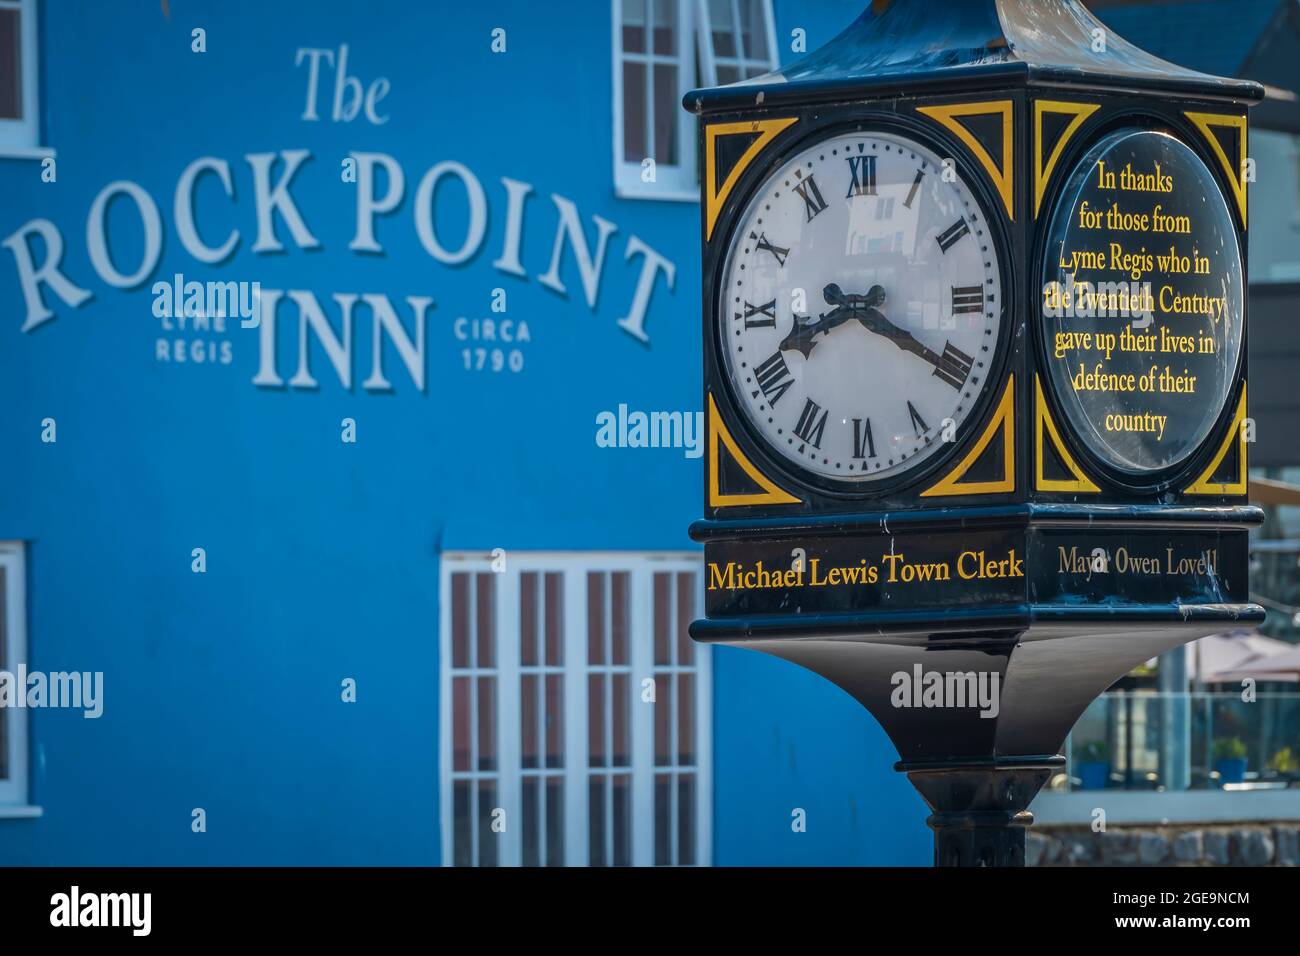 The 20th Century conflicts clock in Lyme Regis. Stock Photo